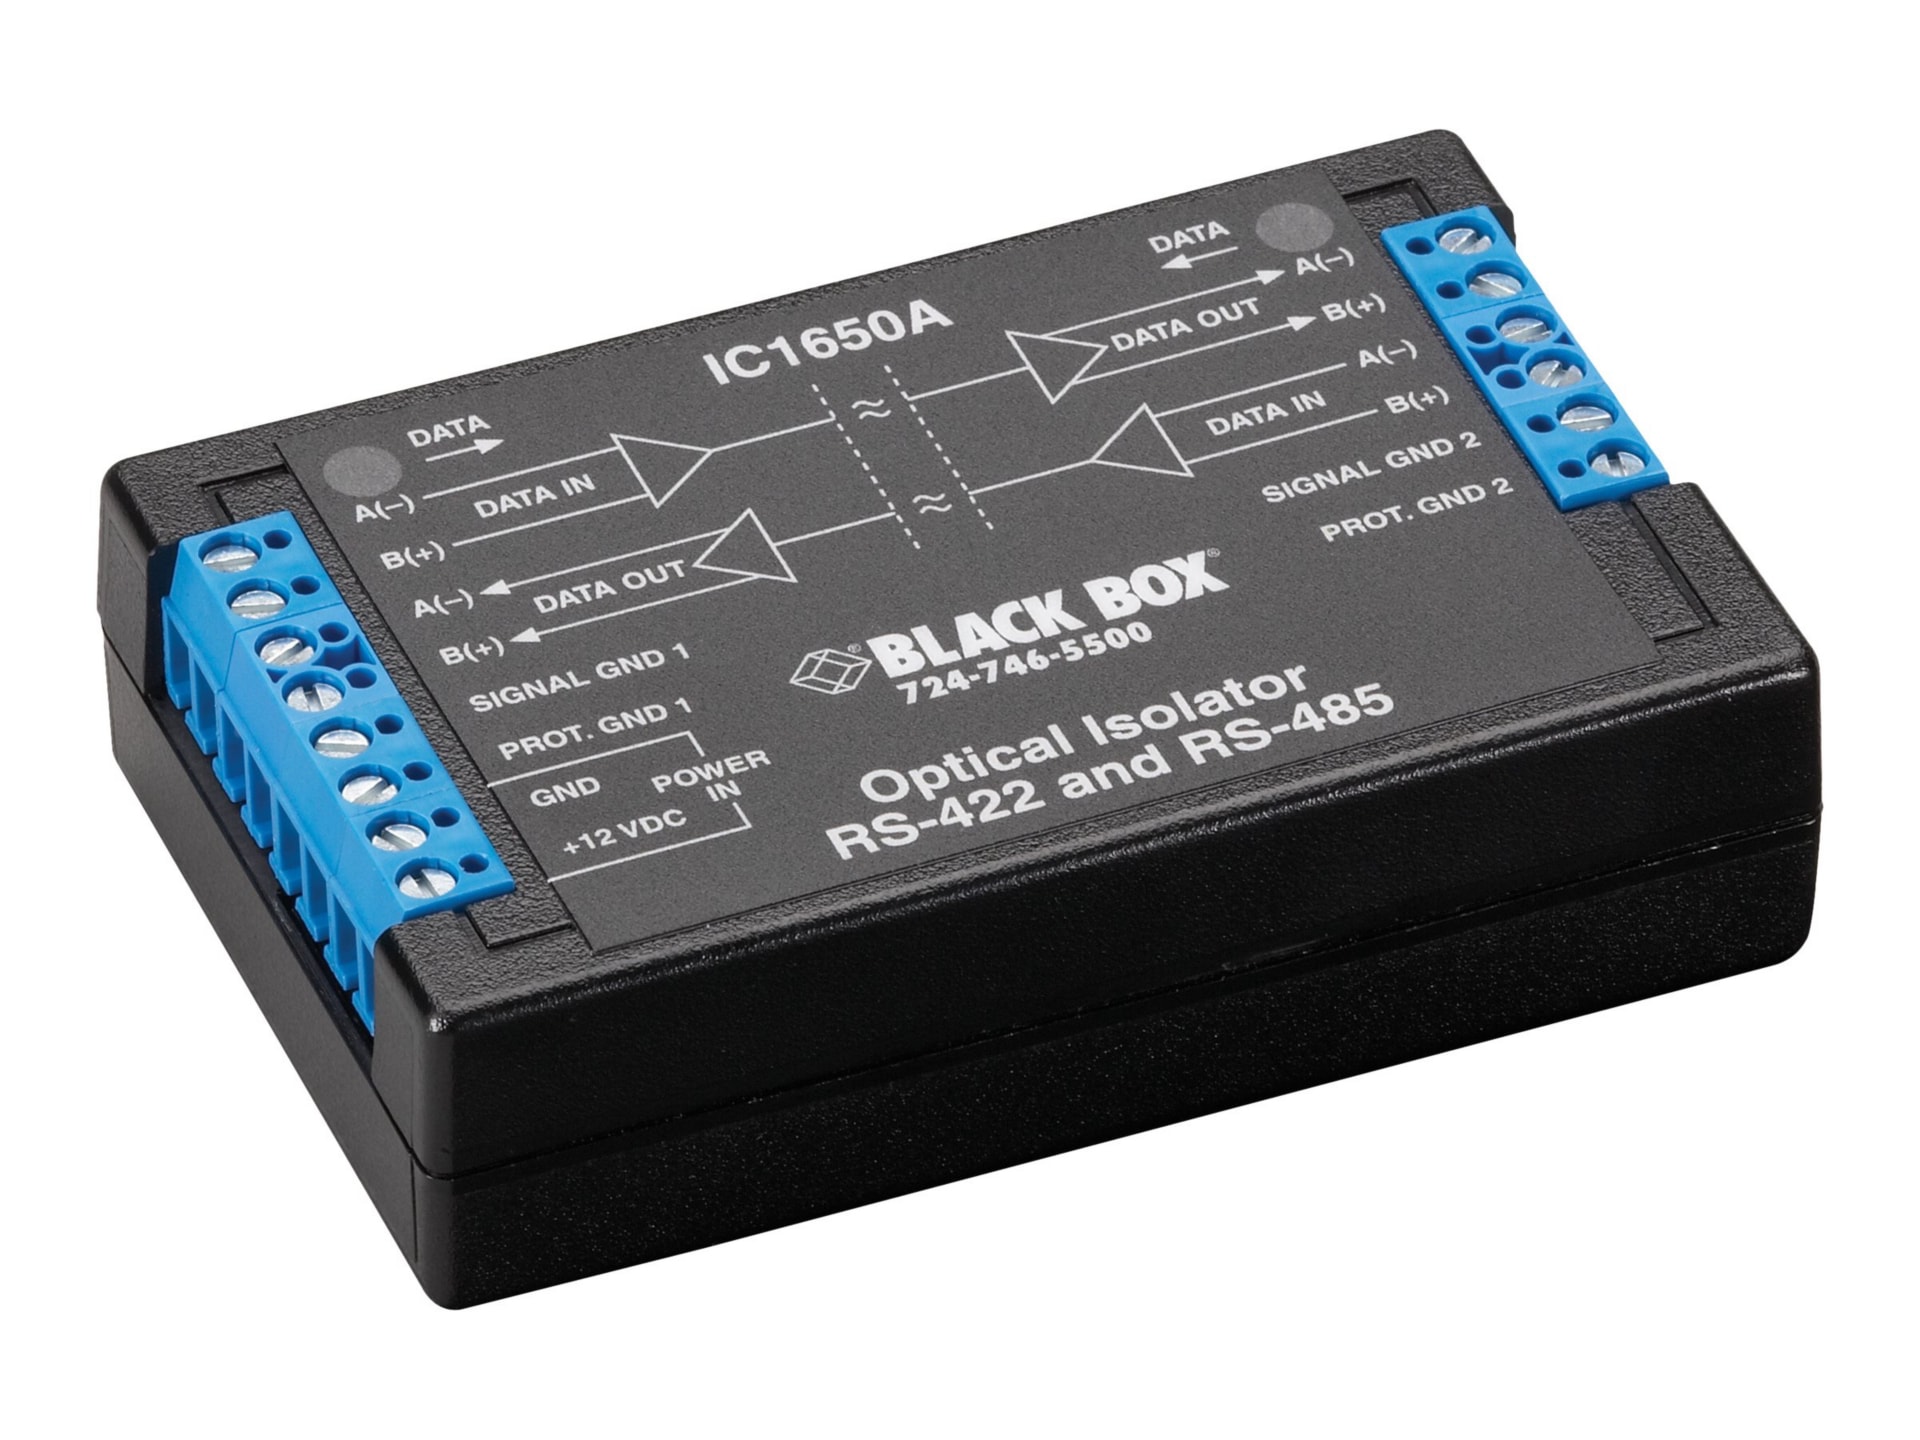 Black Box RS-422 and RS-485 Optical Isolator/Repeater - repeater - RS-232, RS-485